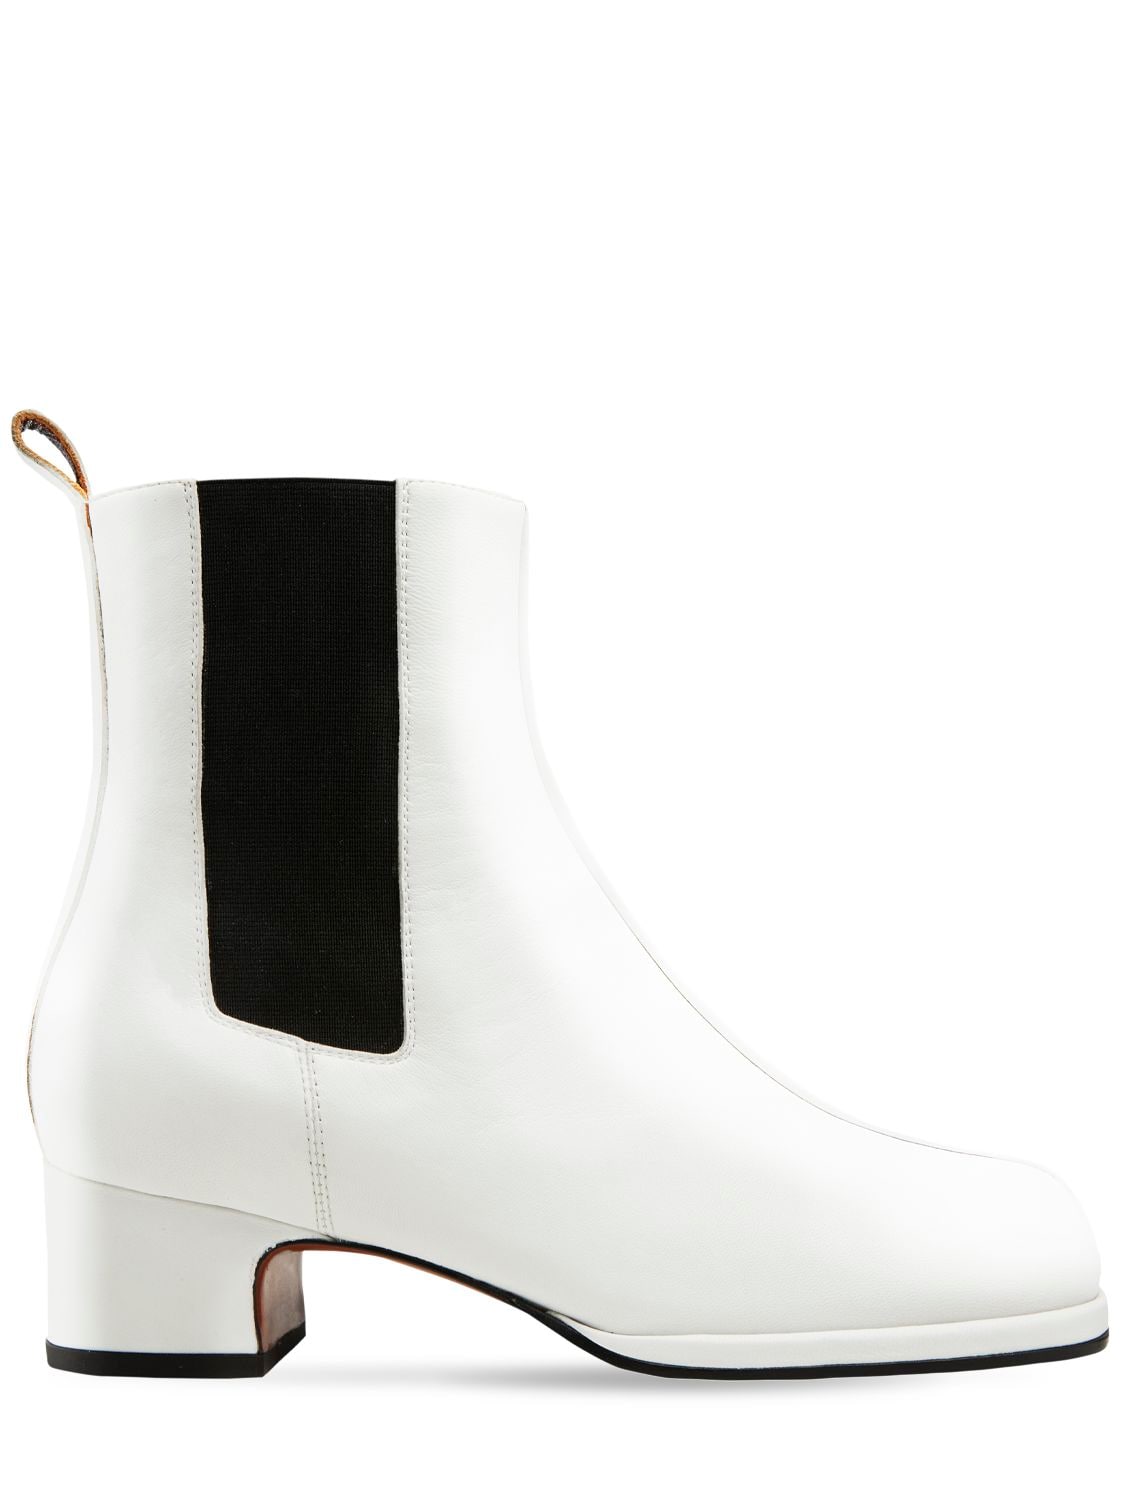 MANU ATELIER 40mm Square Toe Chelsea Boots